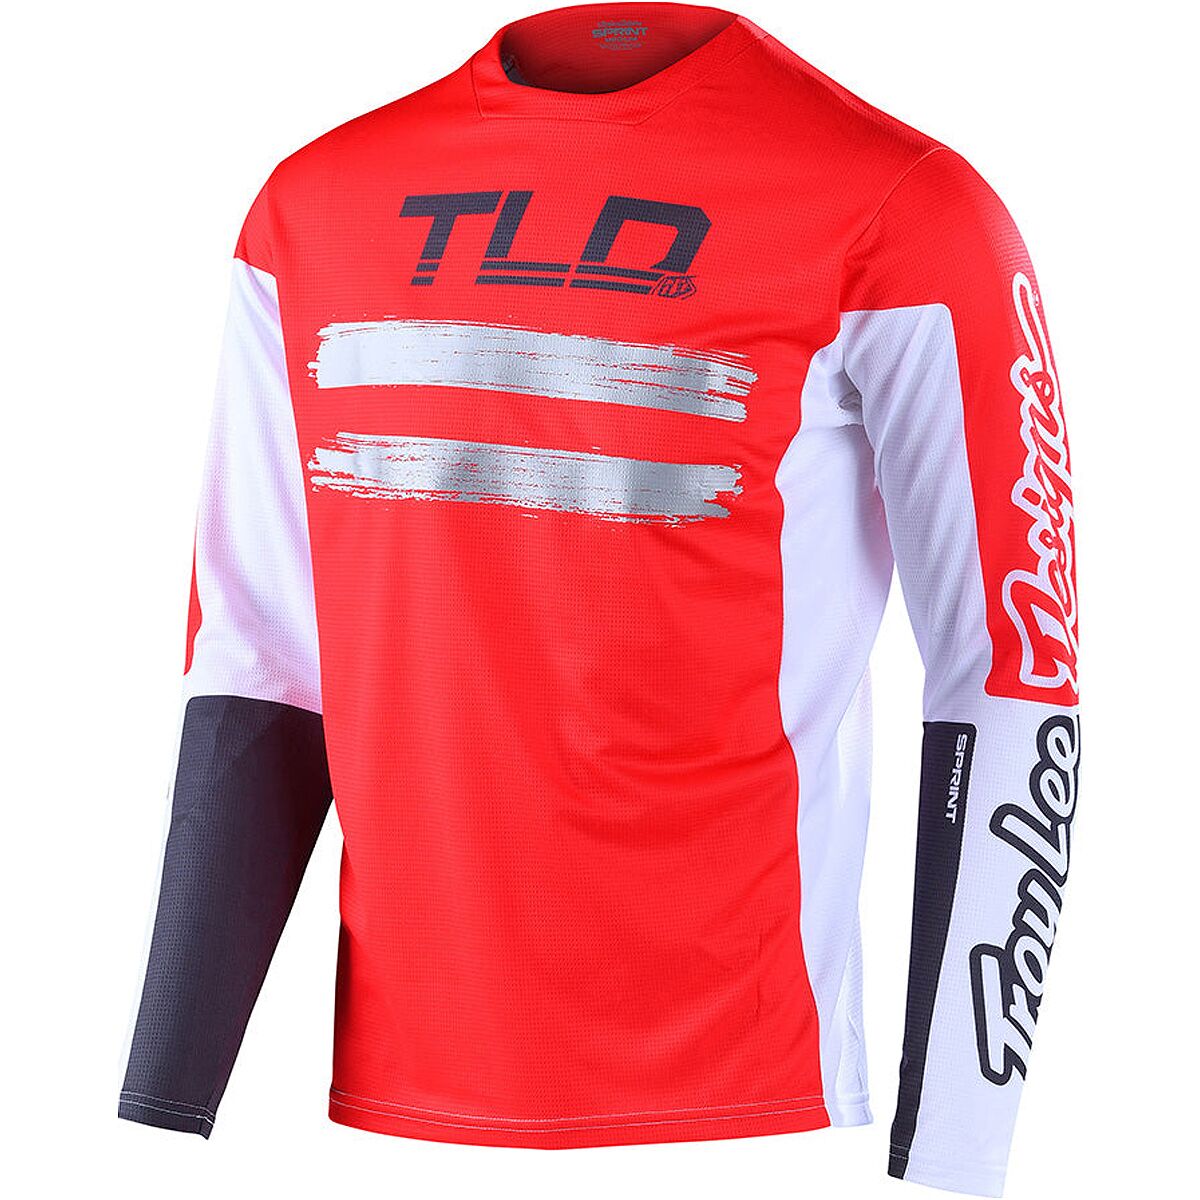 Troy Lee Designs Sprint Long-Sleeve Jersey - Boys' Marker Red/Charcoal, S